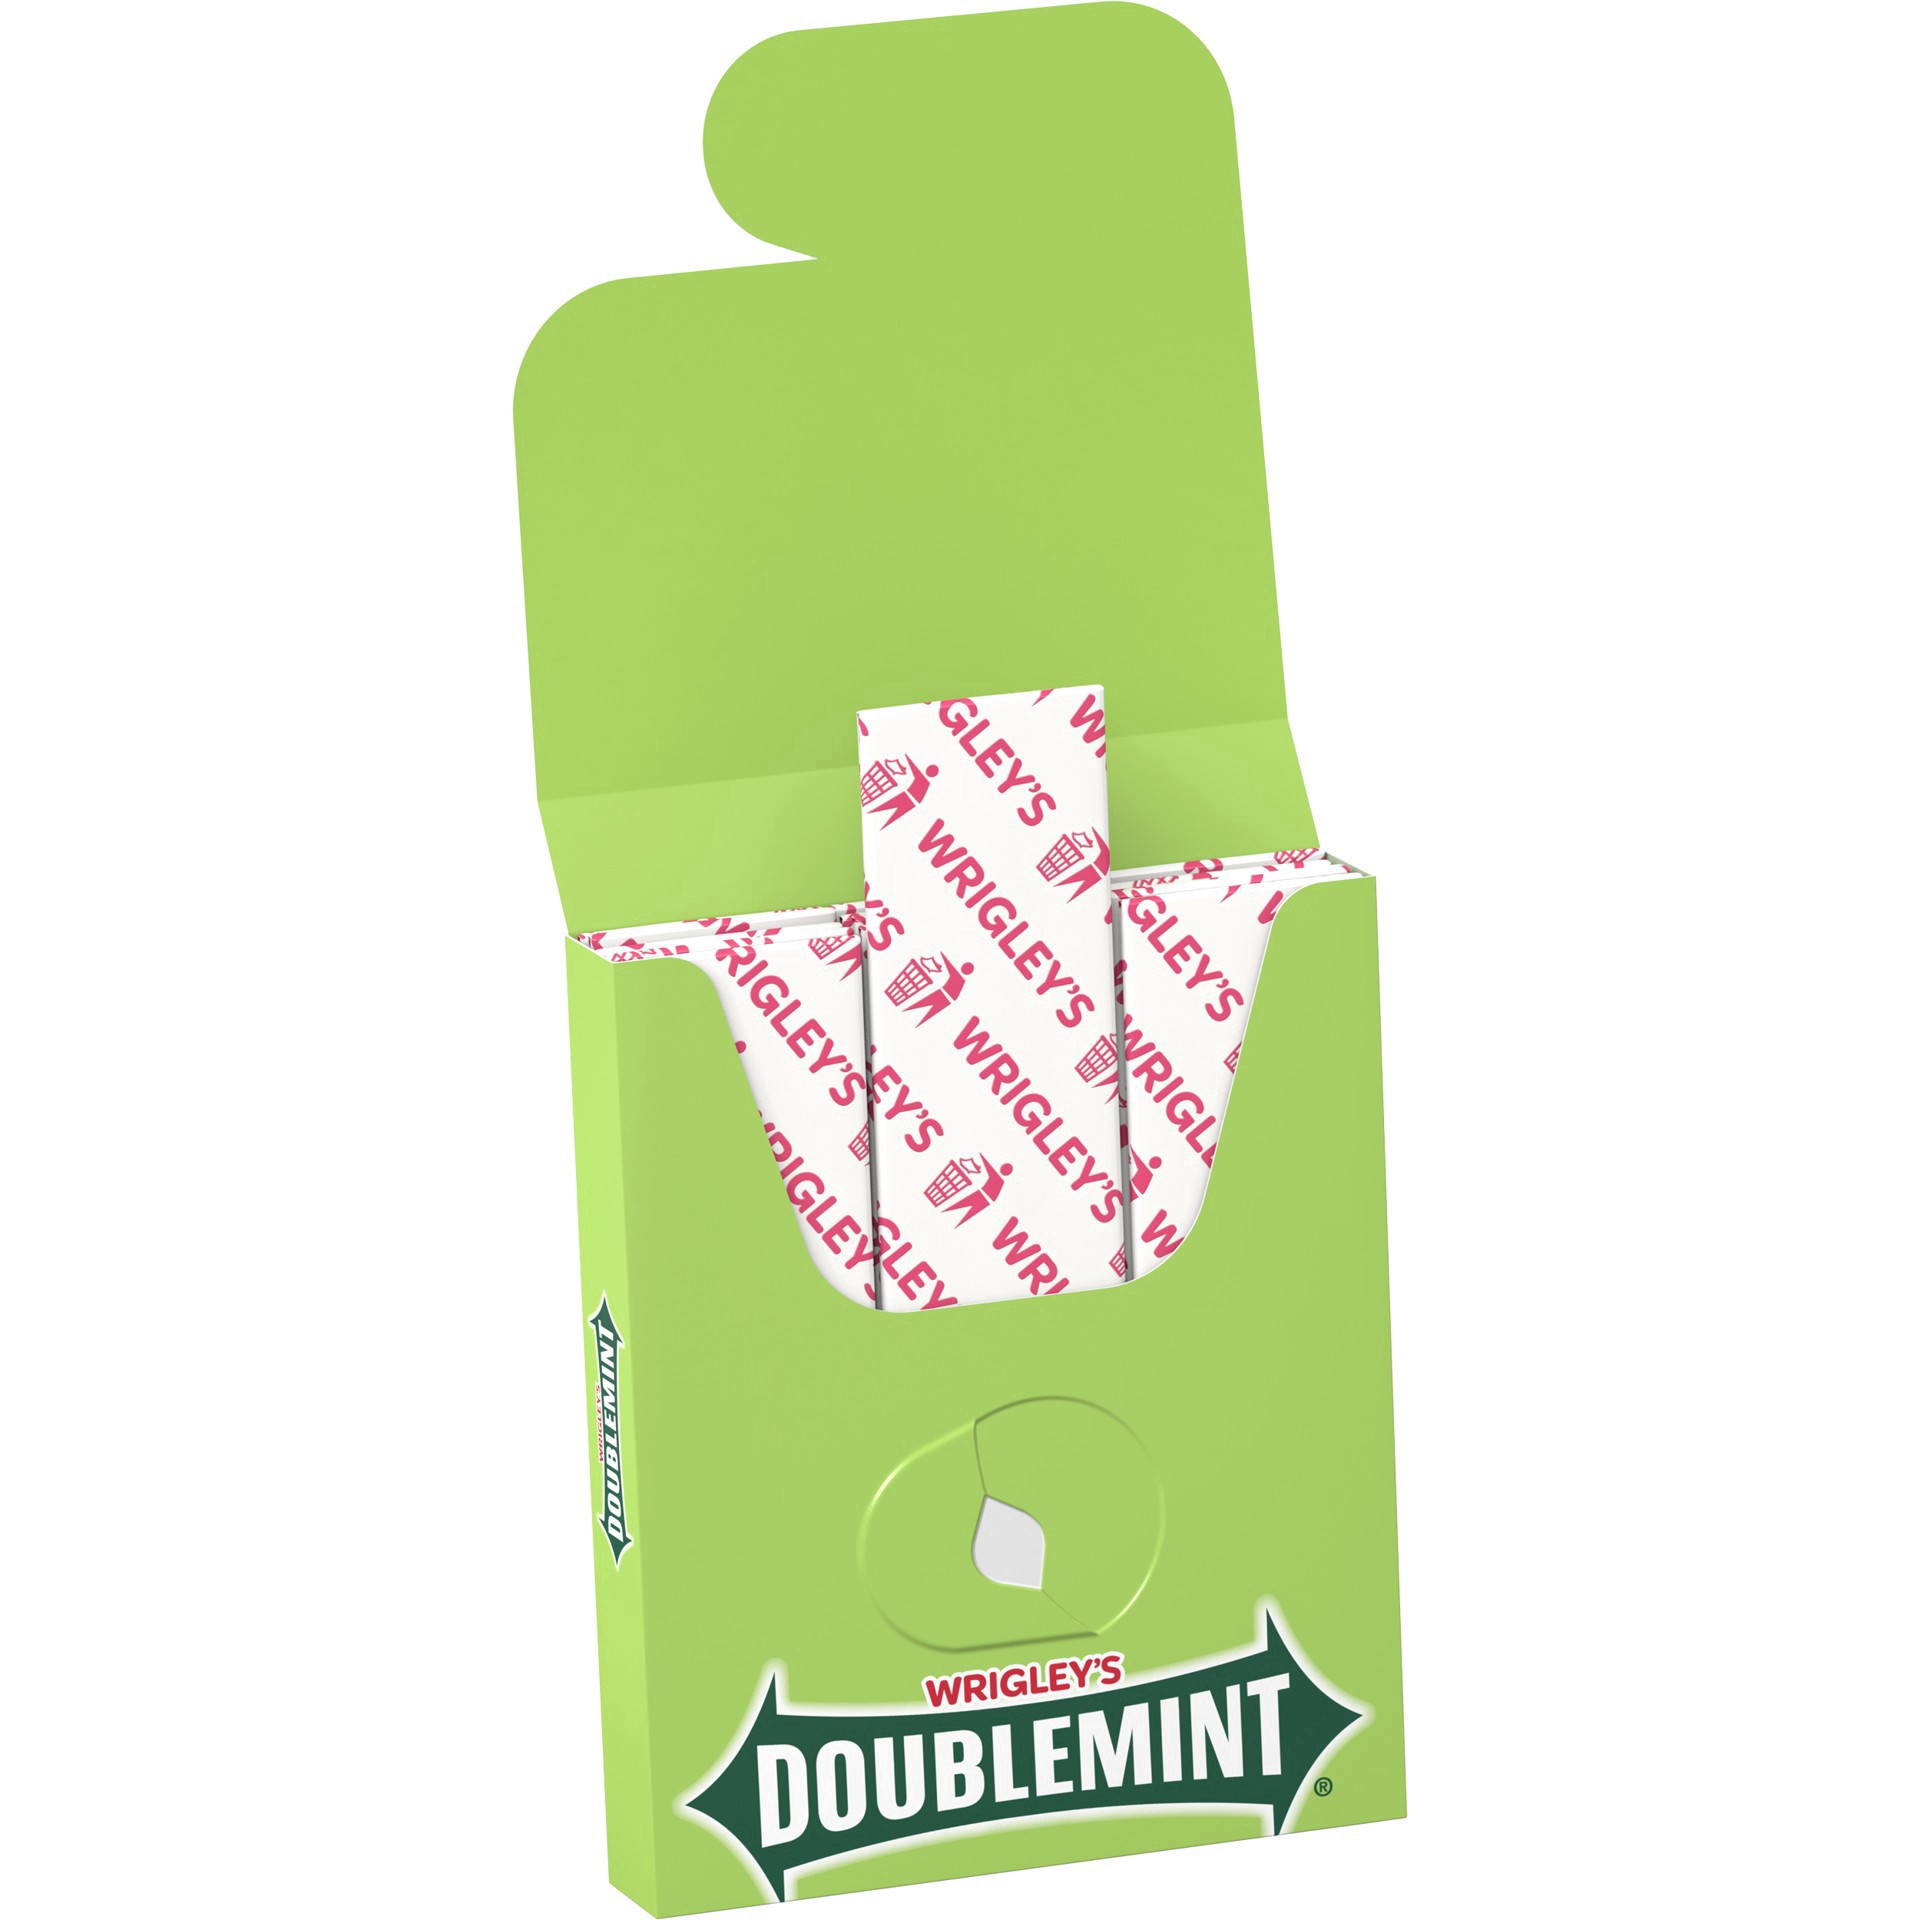 slide 47 of 134, Doublemint WRIGLEY'S DOUBLEMINT Bulk Chewing Gum, Value Pack, 15 ct (3 Pack), 45 ct